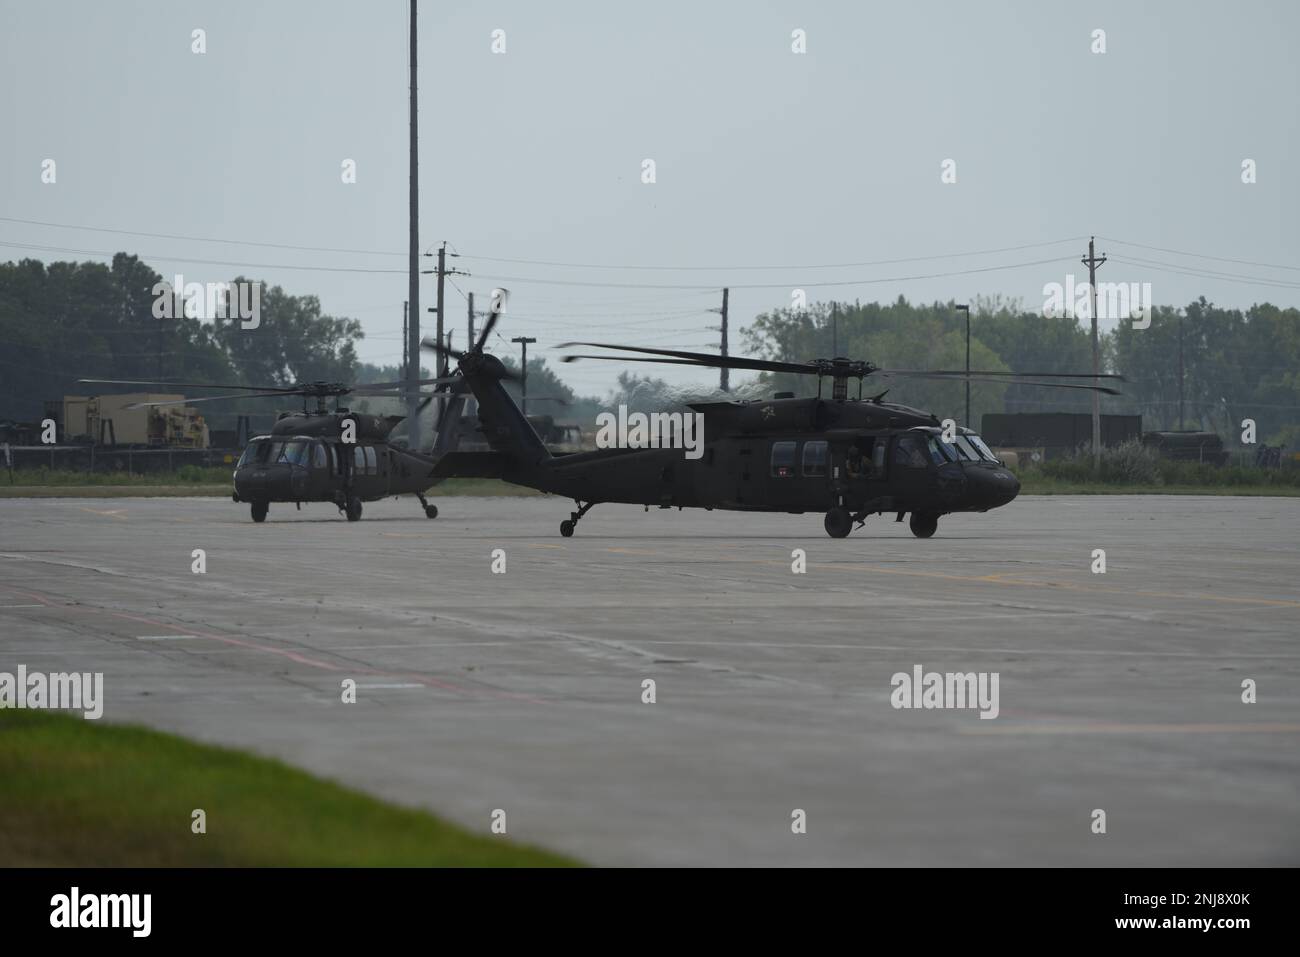 U.S. Army National Guard UH-60 Blackhawks taxi down the flight line at the 185th Air Refueling Wing at Sioux City, Iowa, August 6, 2022. The Blackhawks transported distinguished guests, including Maj. Gen. Benjamin J. Correll, Adjutant General of the Iowa National Guard, of the Iowa Army and Air National Guard to the 185th ARW for the unit’s Change of Command ceremony. Stock Photo